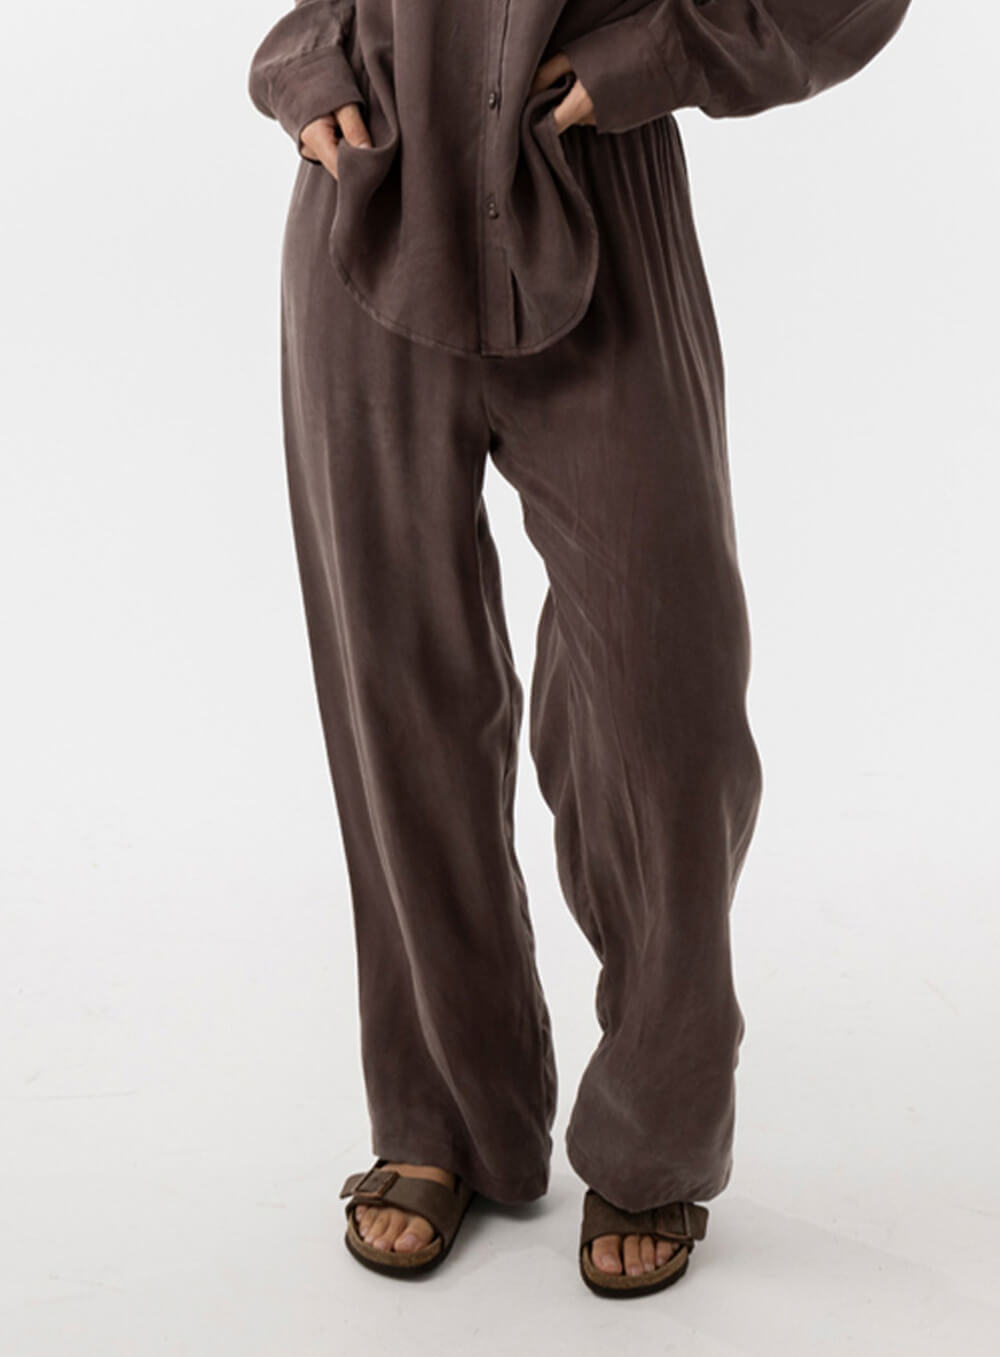 The Chloe Cupro pant features cupro and viscose blended fabrication with a velvety soft handfeel that creates a draping look, a drawcord waistband, straight leg design with side pockets.